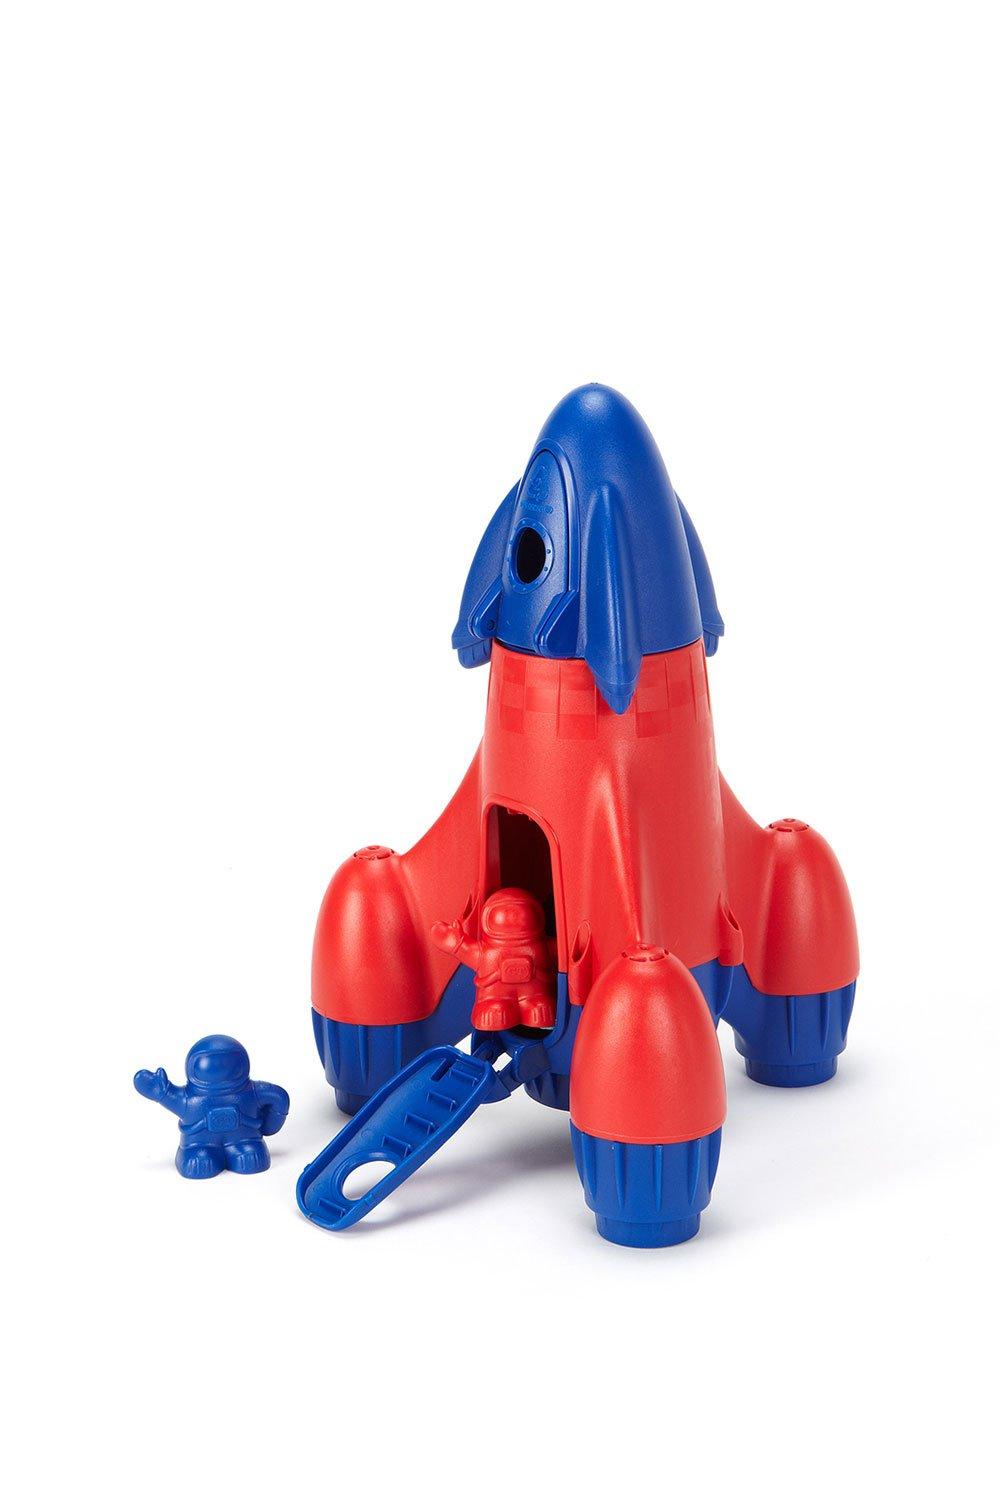 Green Toys Rocket Toy|red